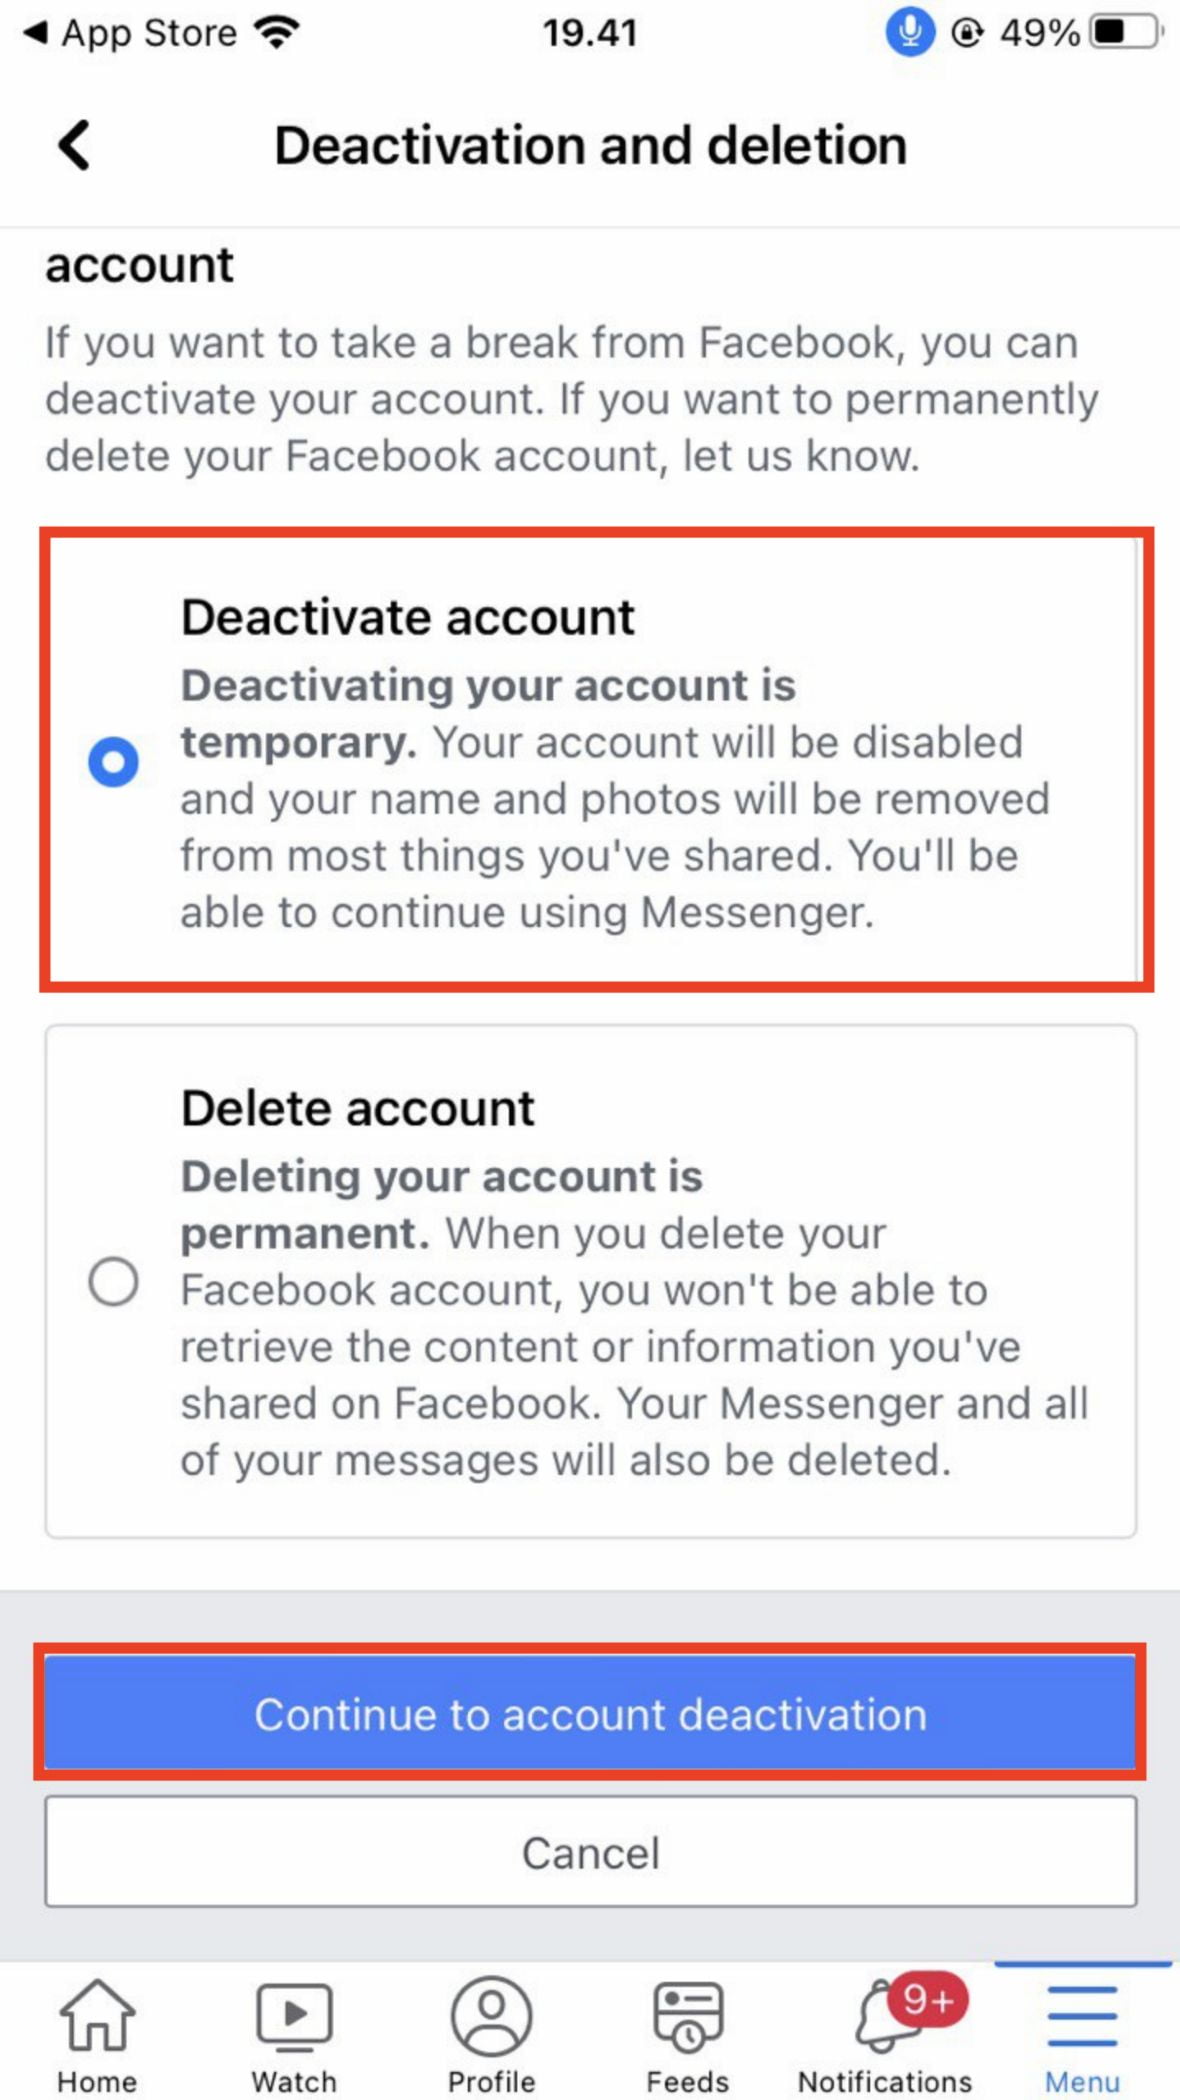 How to Deactivate Facebook Account using iPhone